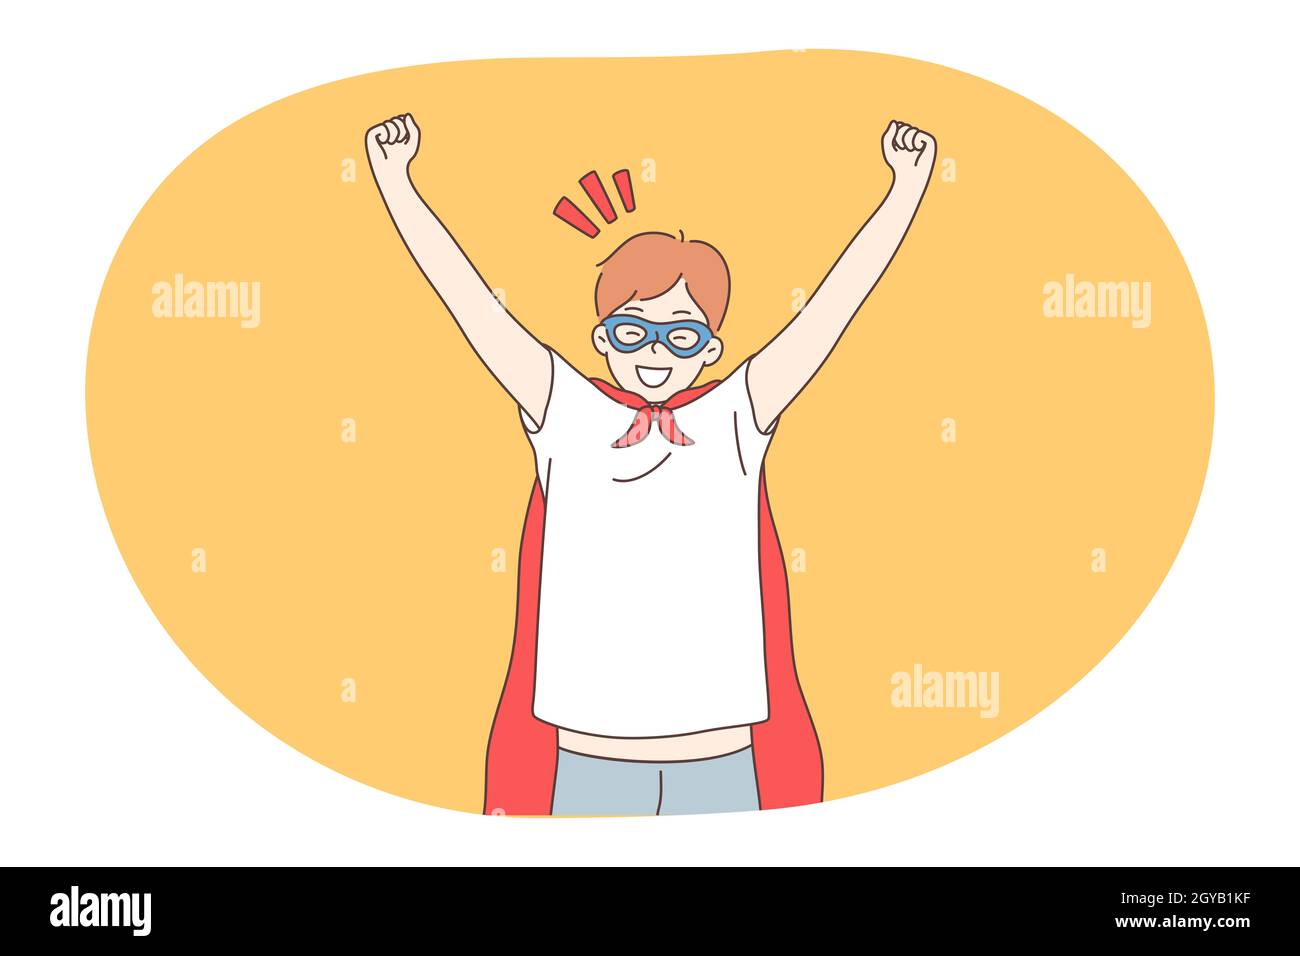 Superhero, superman, power concept. Young smiling boy child in red superman costume mantle and mask imagining power and leadership. Fantasy, imaginati Stock Photo